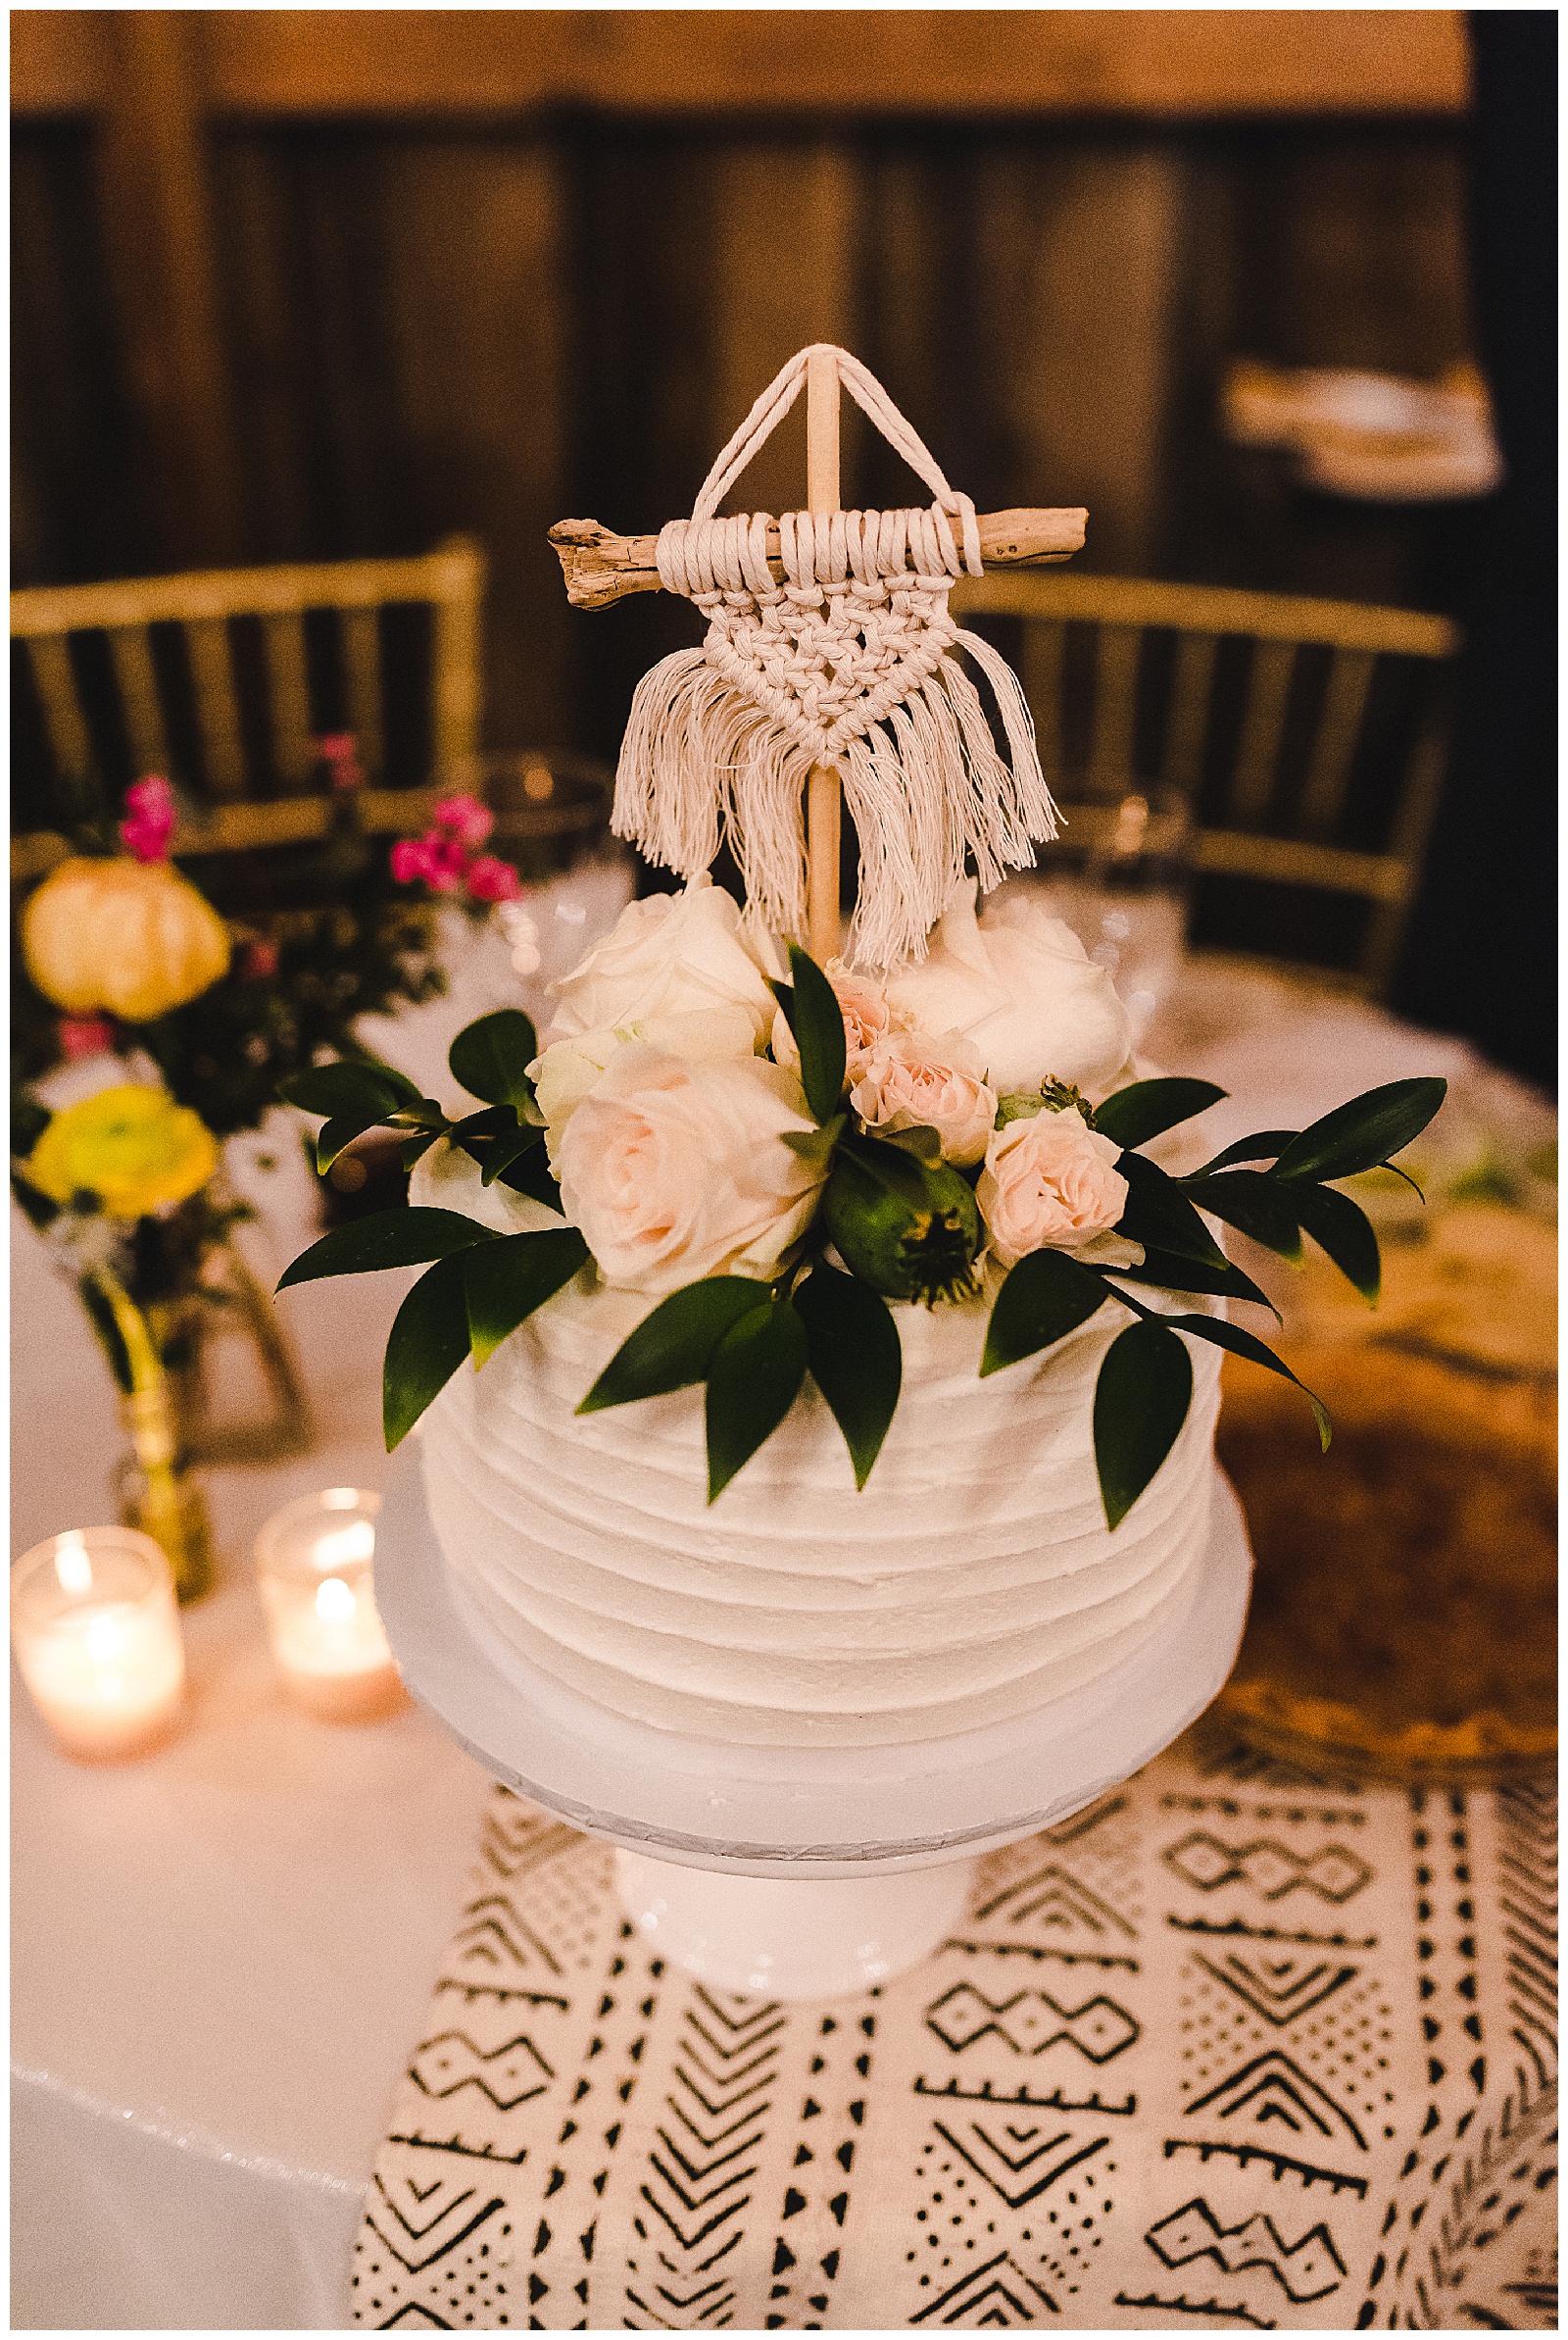 Bohemian chic cake with a macrame topper